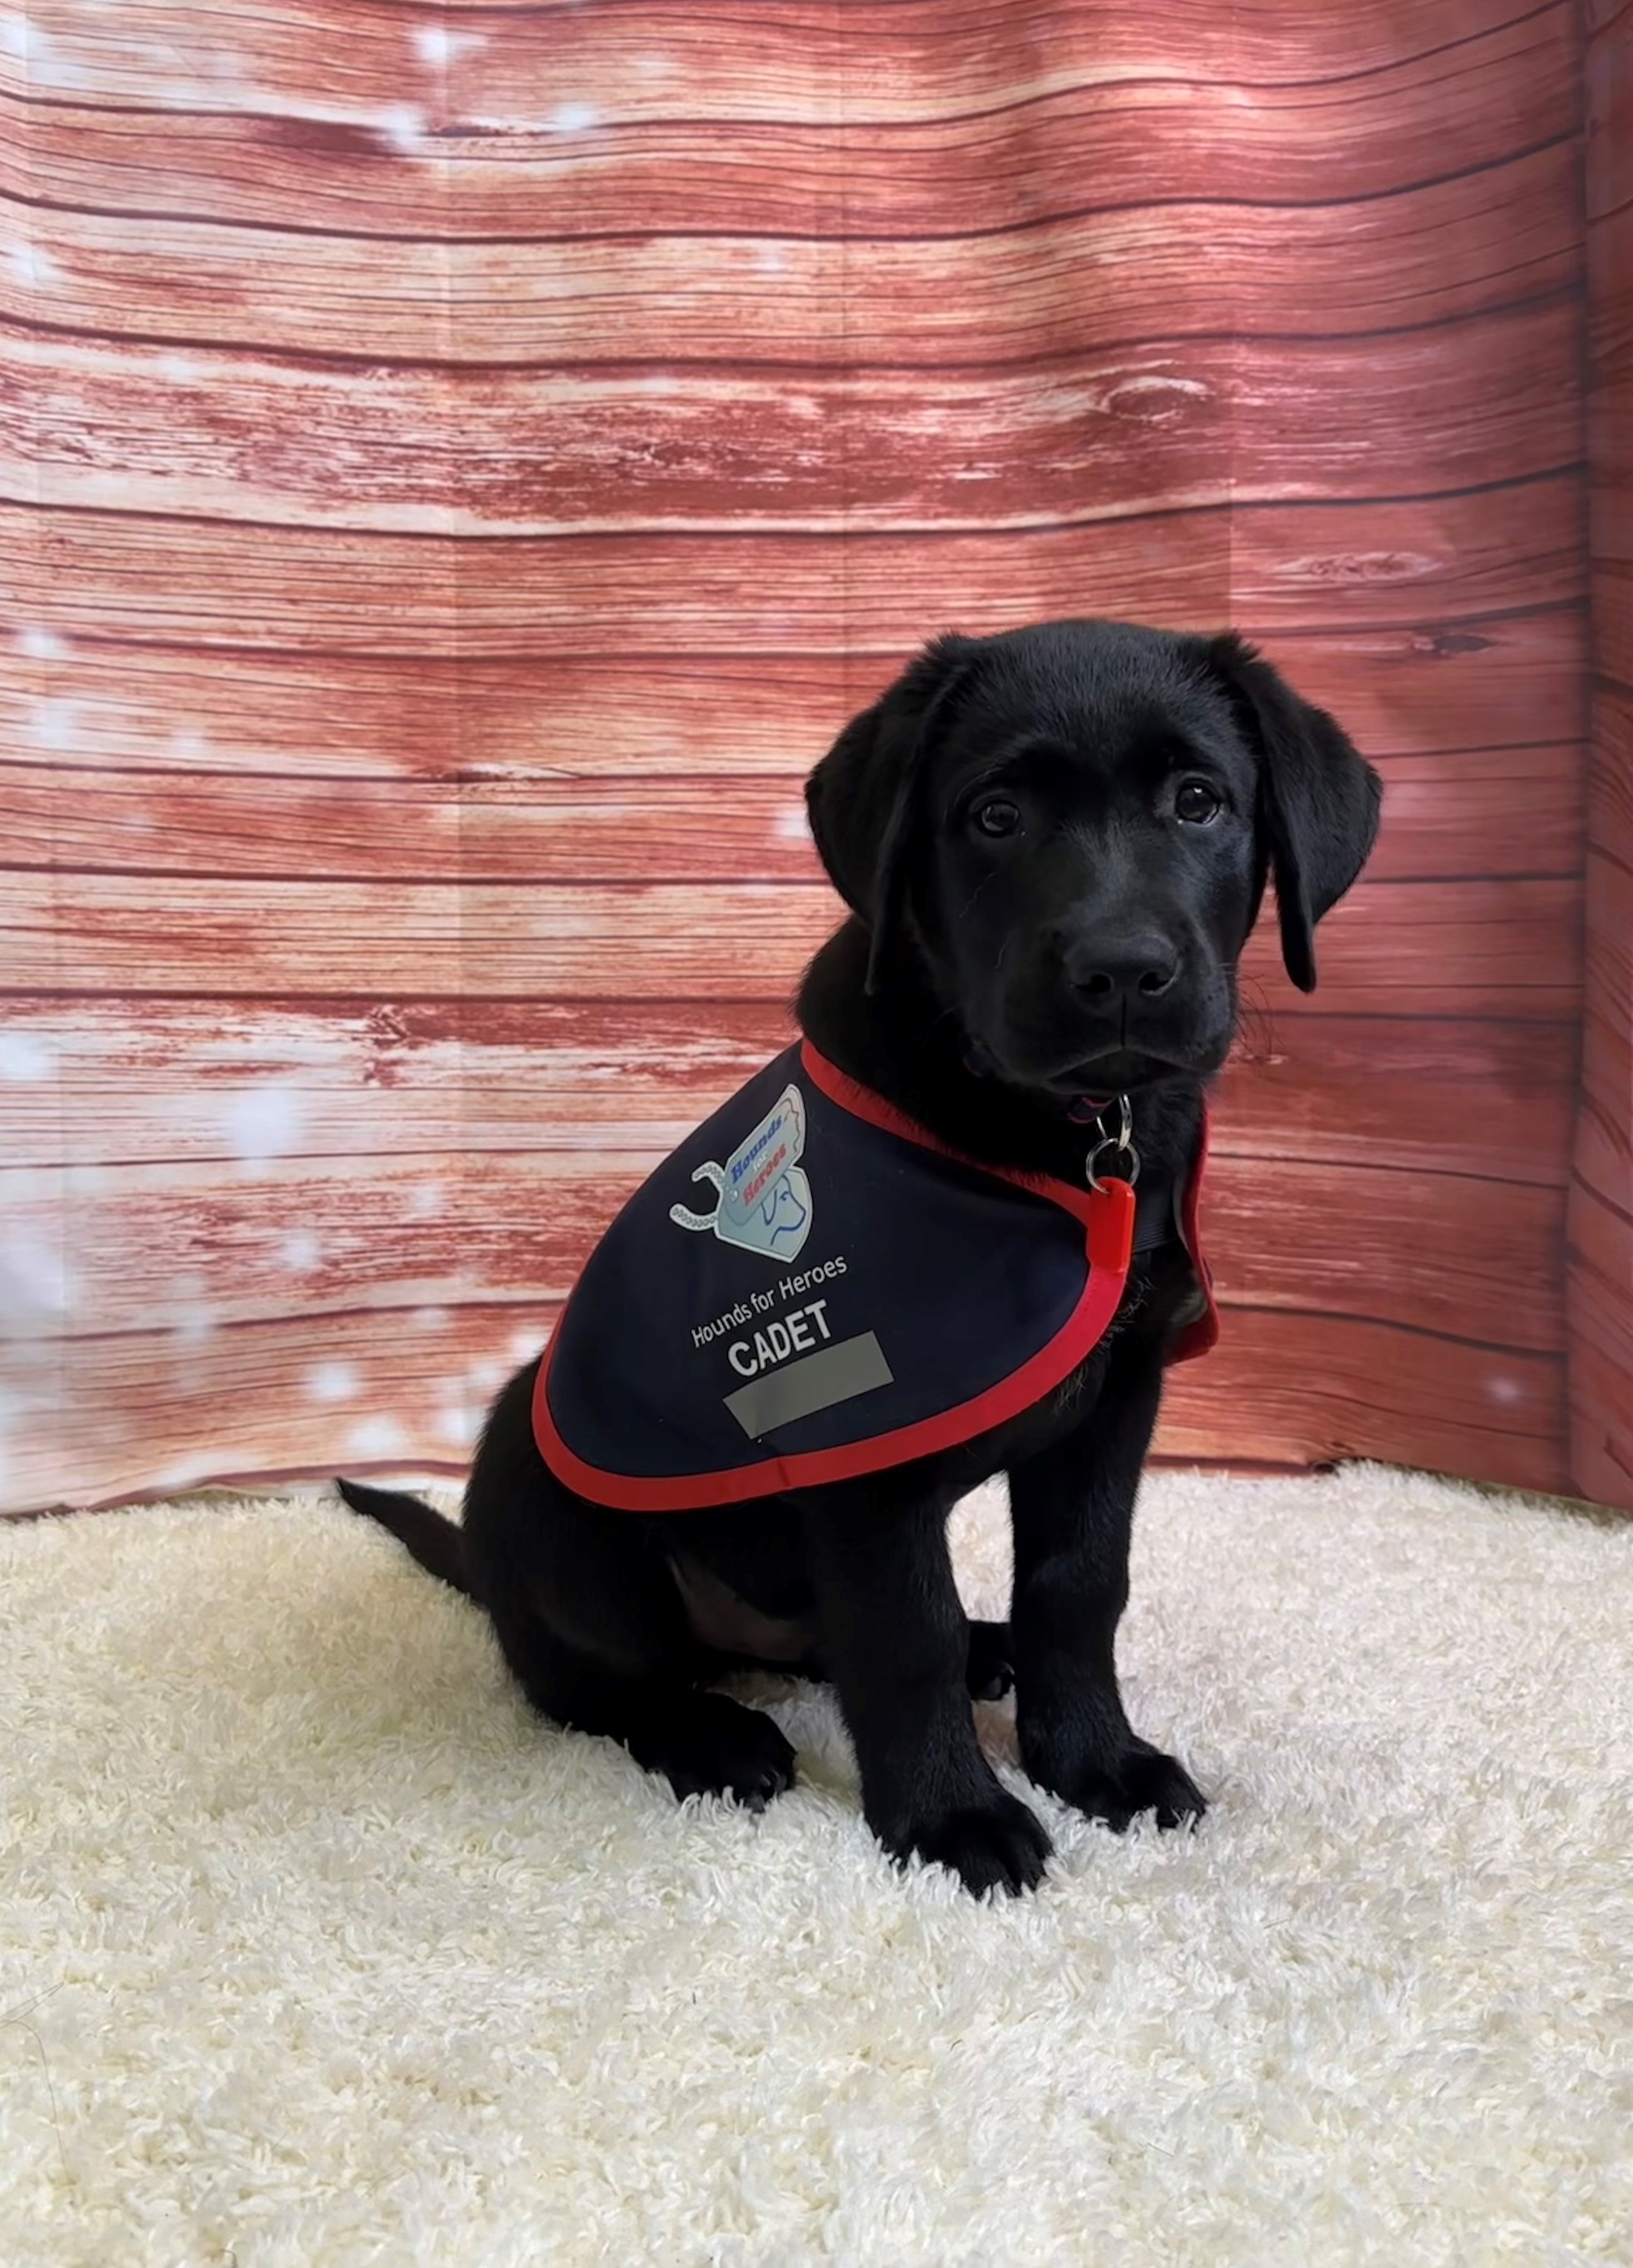 Black Labrador puppy sat on a rug with an assistance dog jacket on.